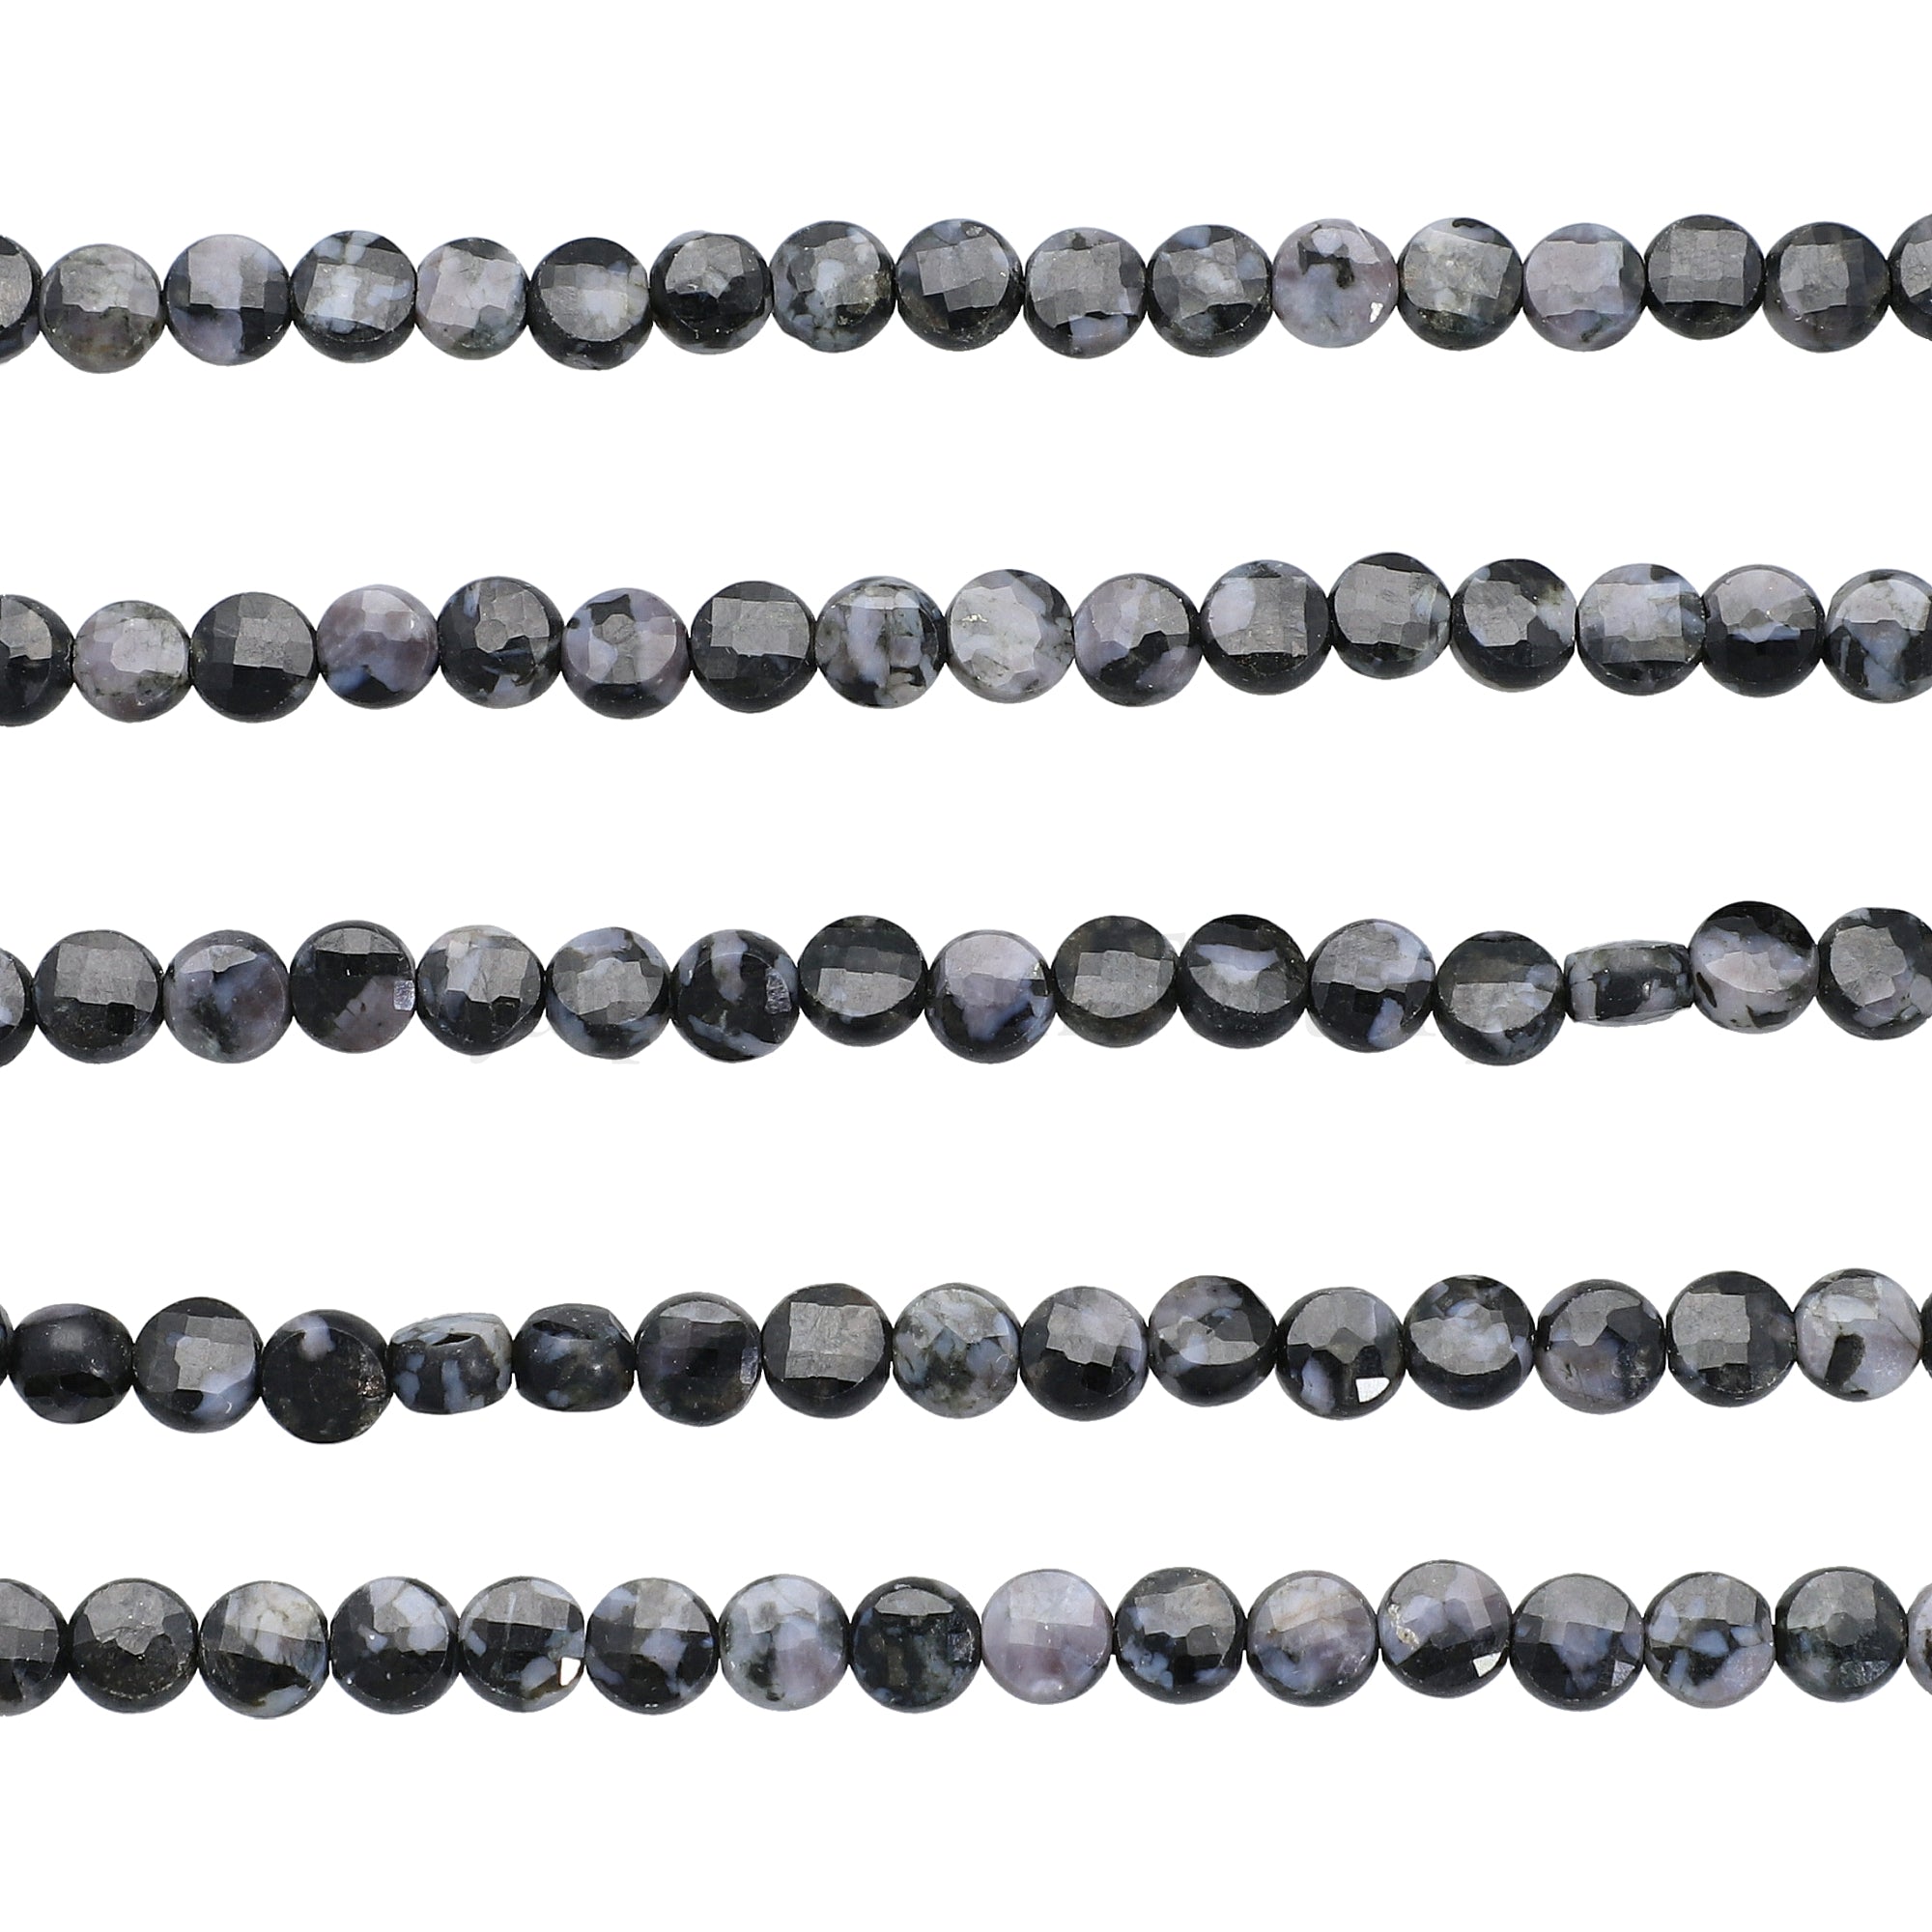 6 MM Indigo Gabbro Agate Faceted Coin Beads 15 Inches Strand